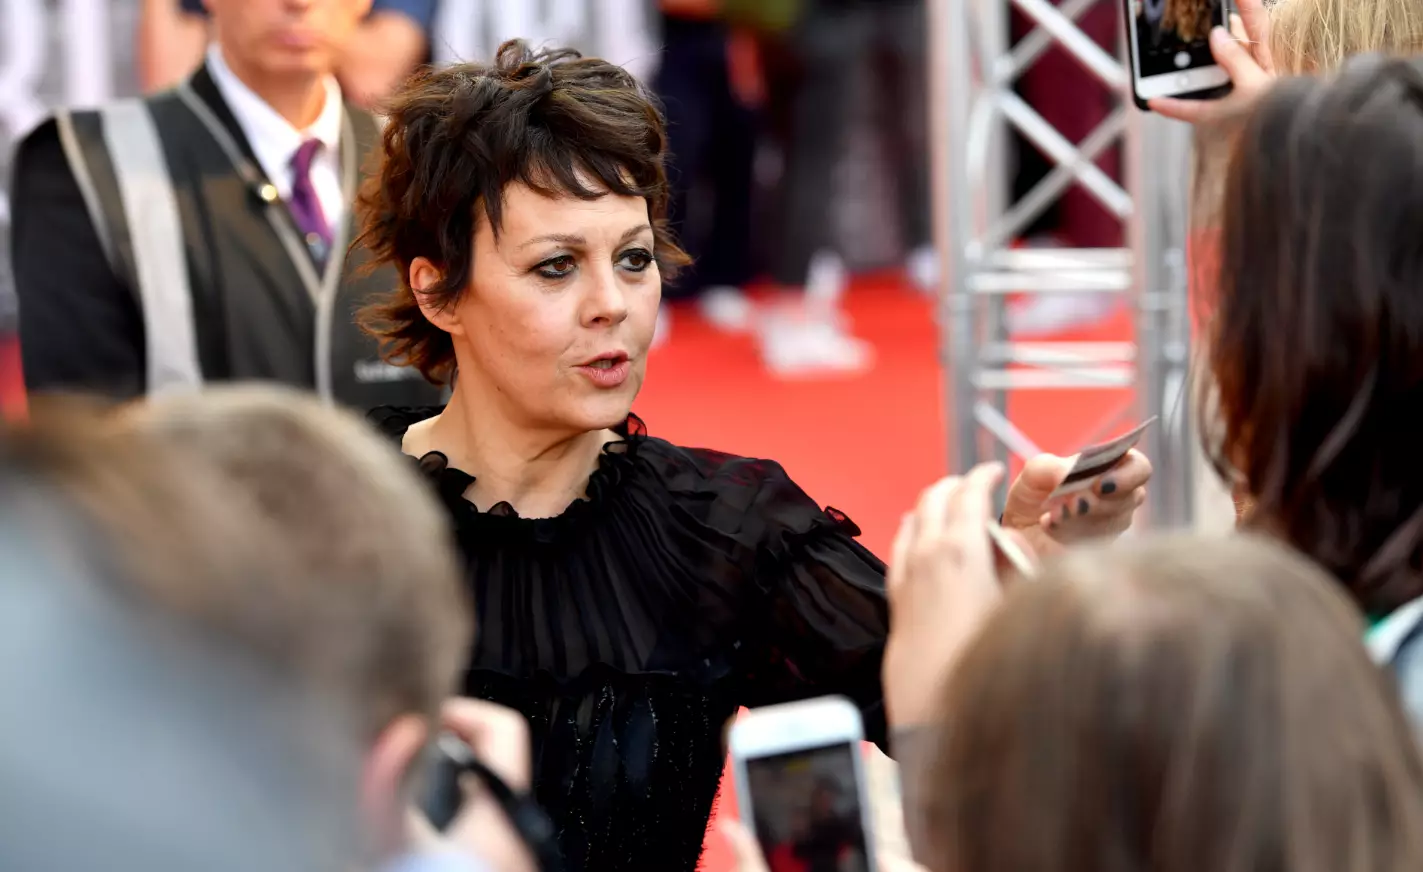 Helen McCrory at the premiere.